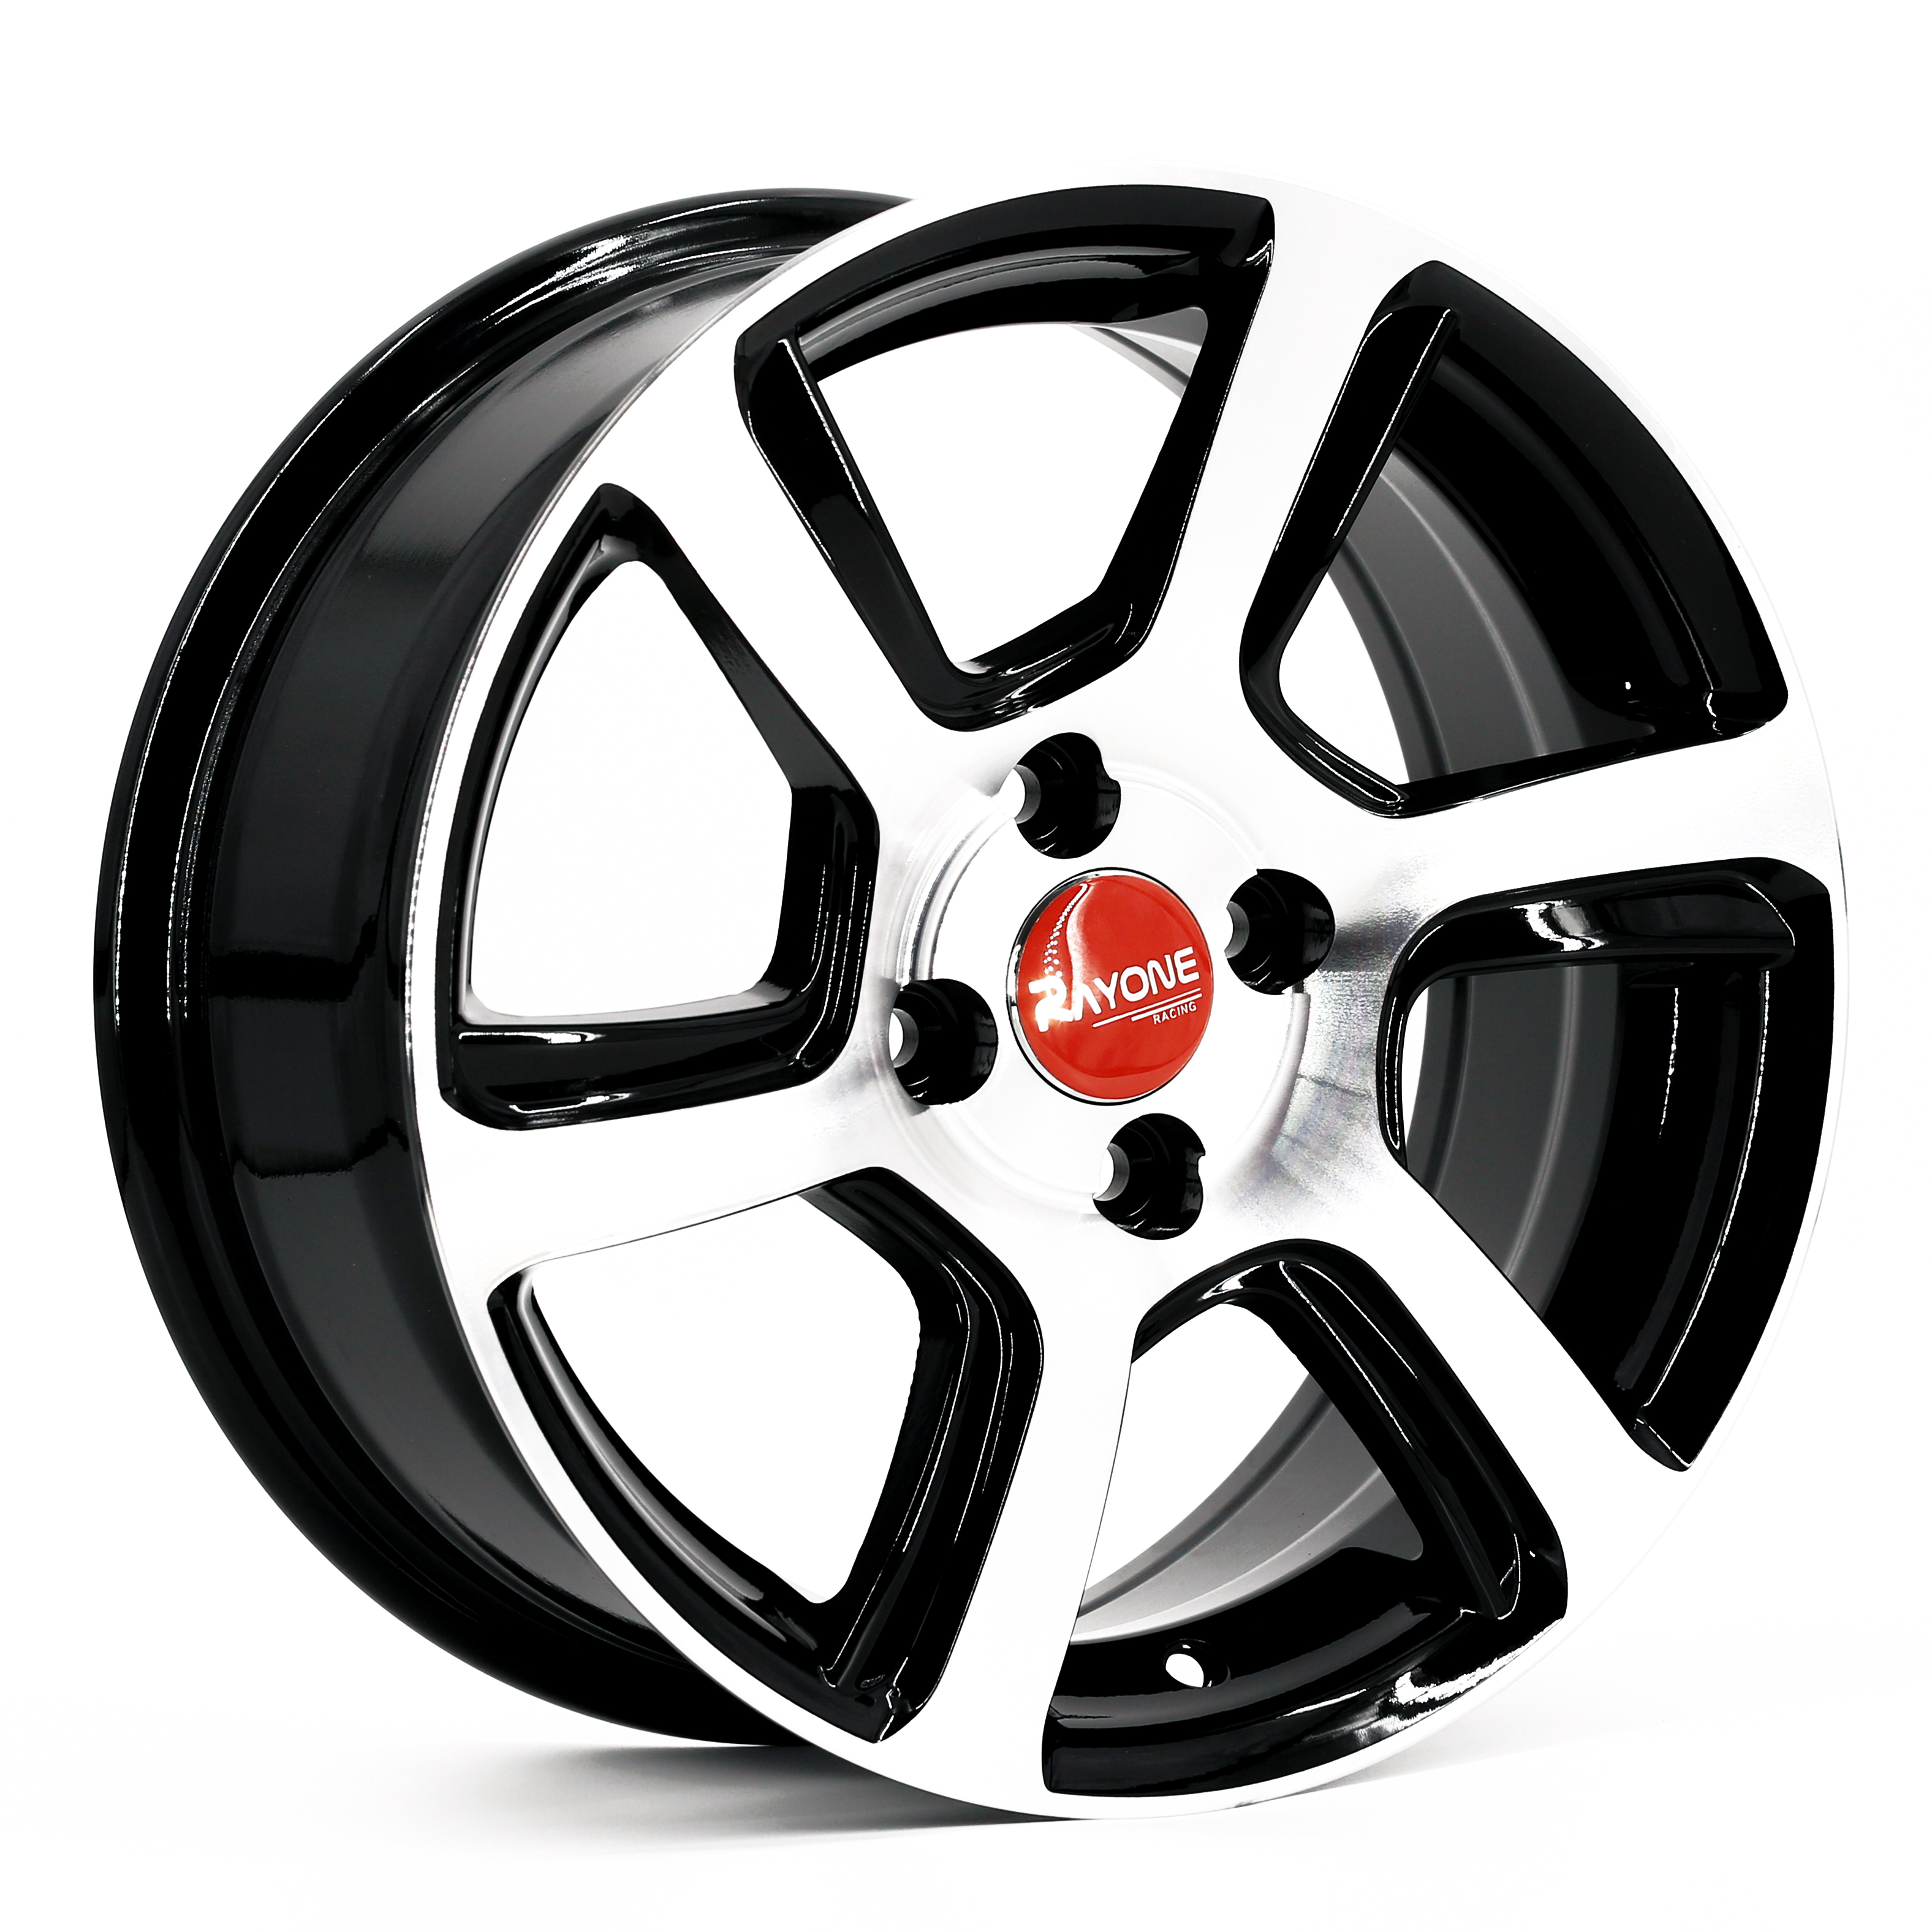 Wholesale 15 Inch Car Alloy Wheels - Aftermarket Aluminum Alloy Wheel Bolero Alloy Wheels 15 Inch – Rayone